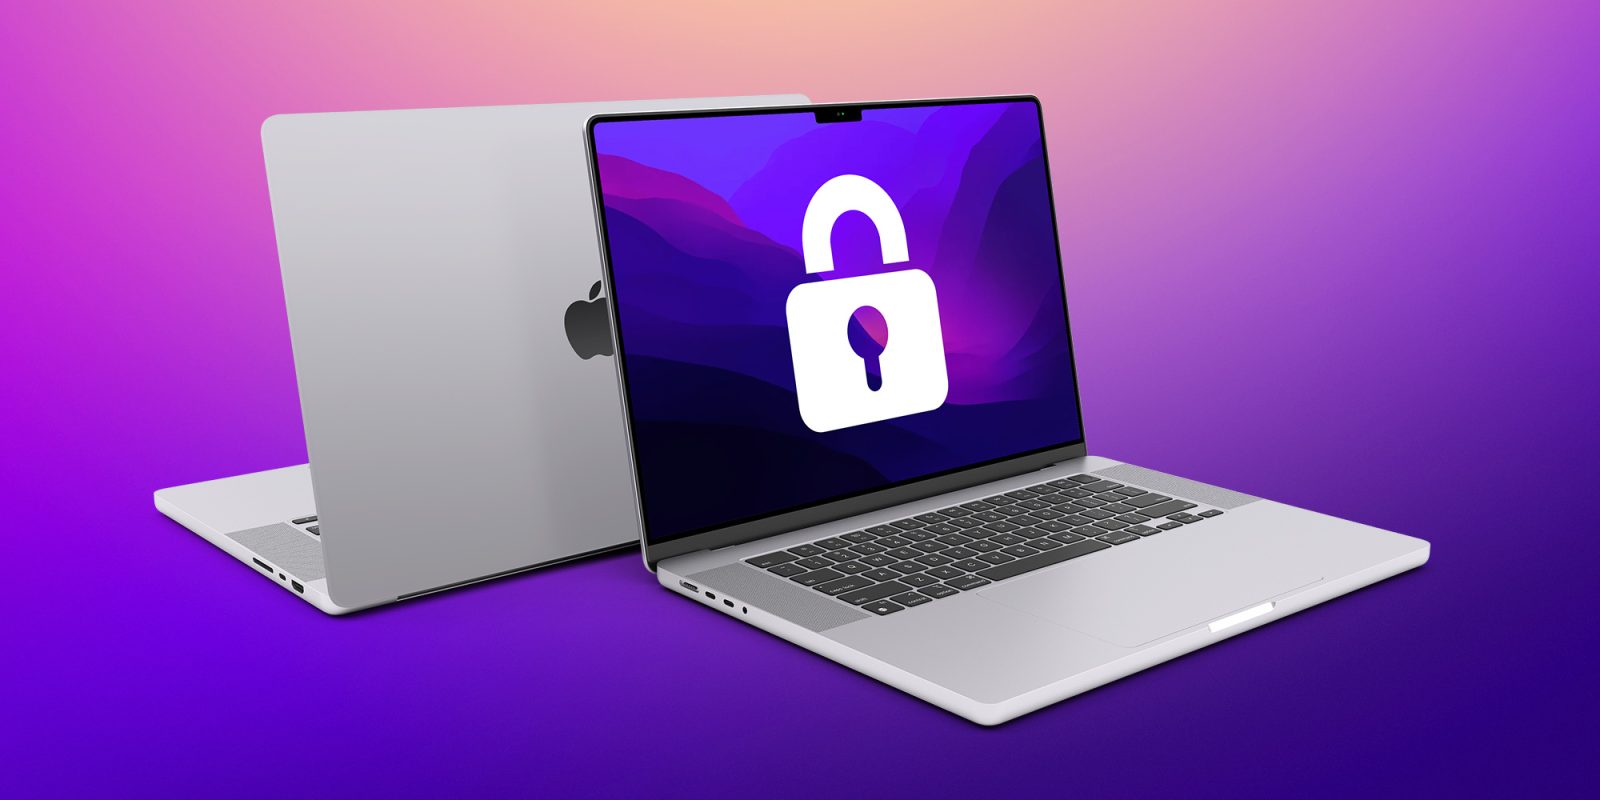 Apple reportedly introduced major under-the-hood security updates to macOS this year